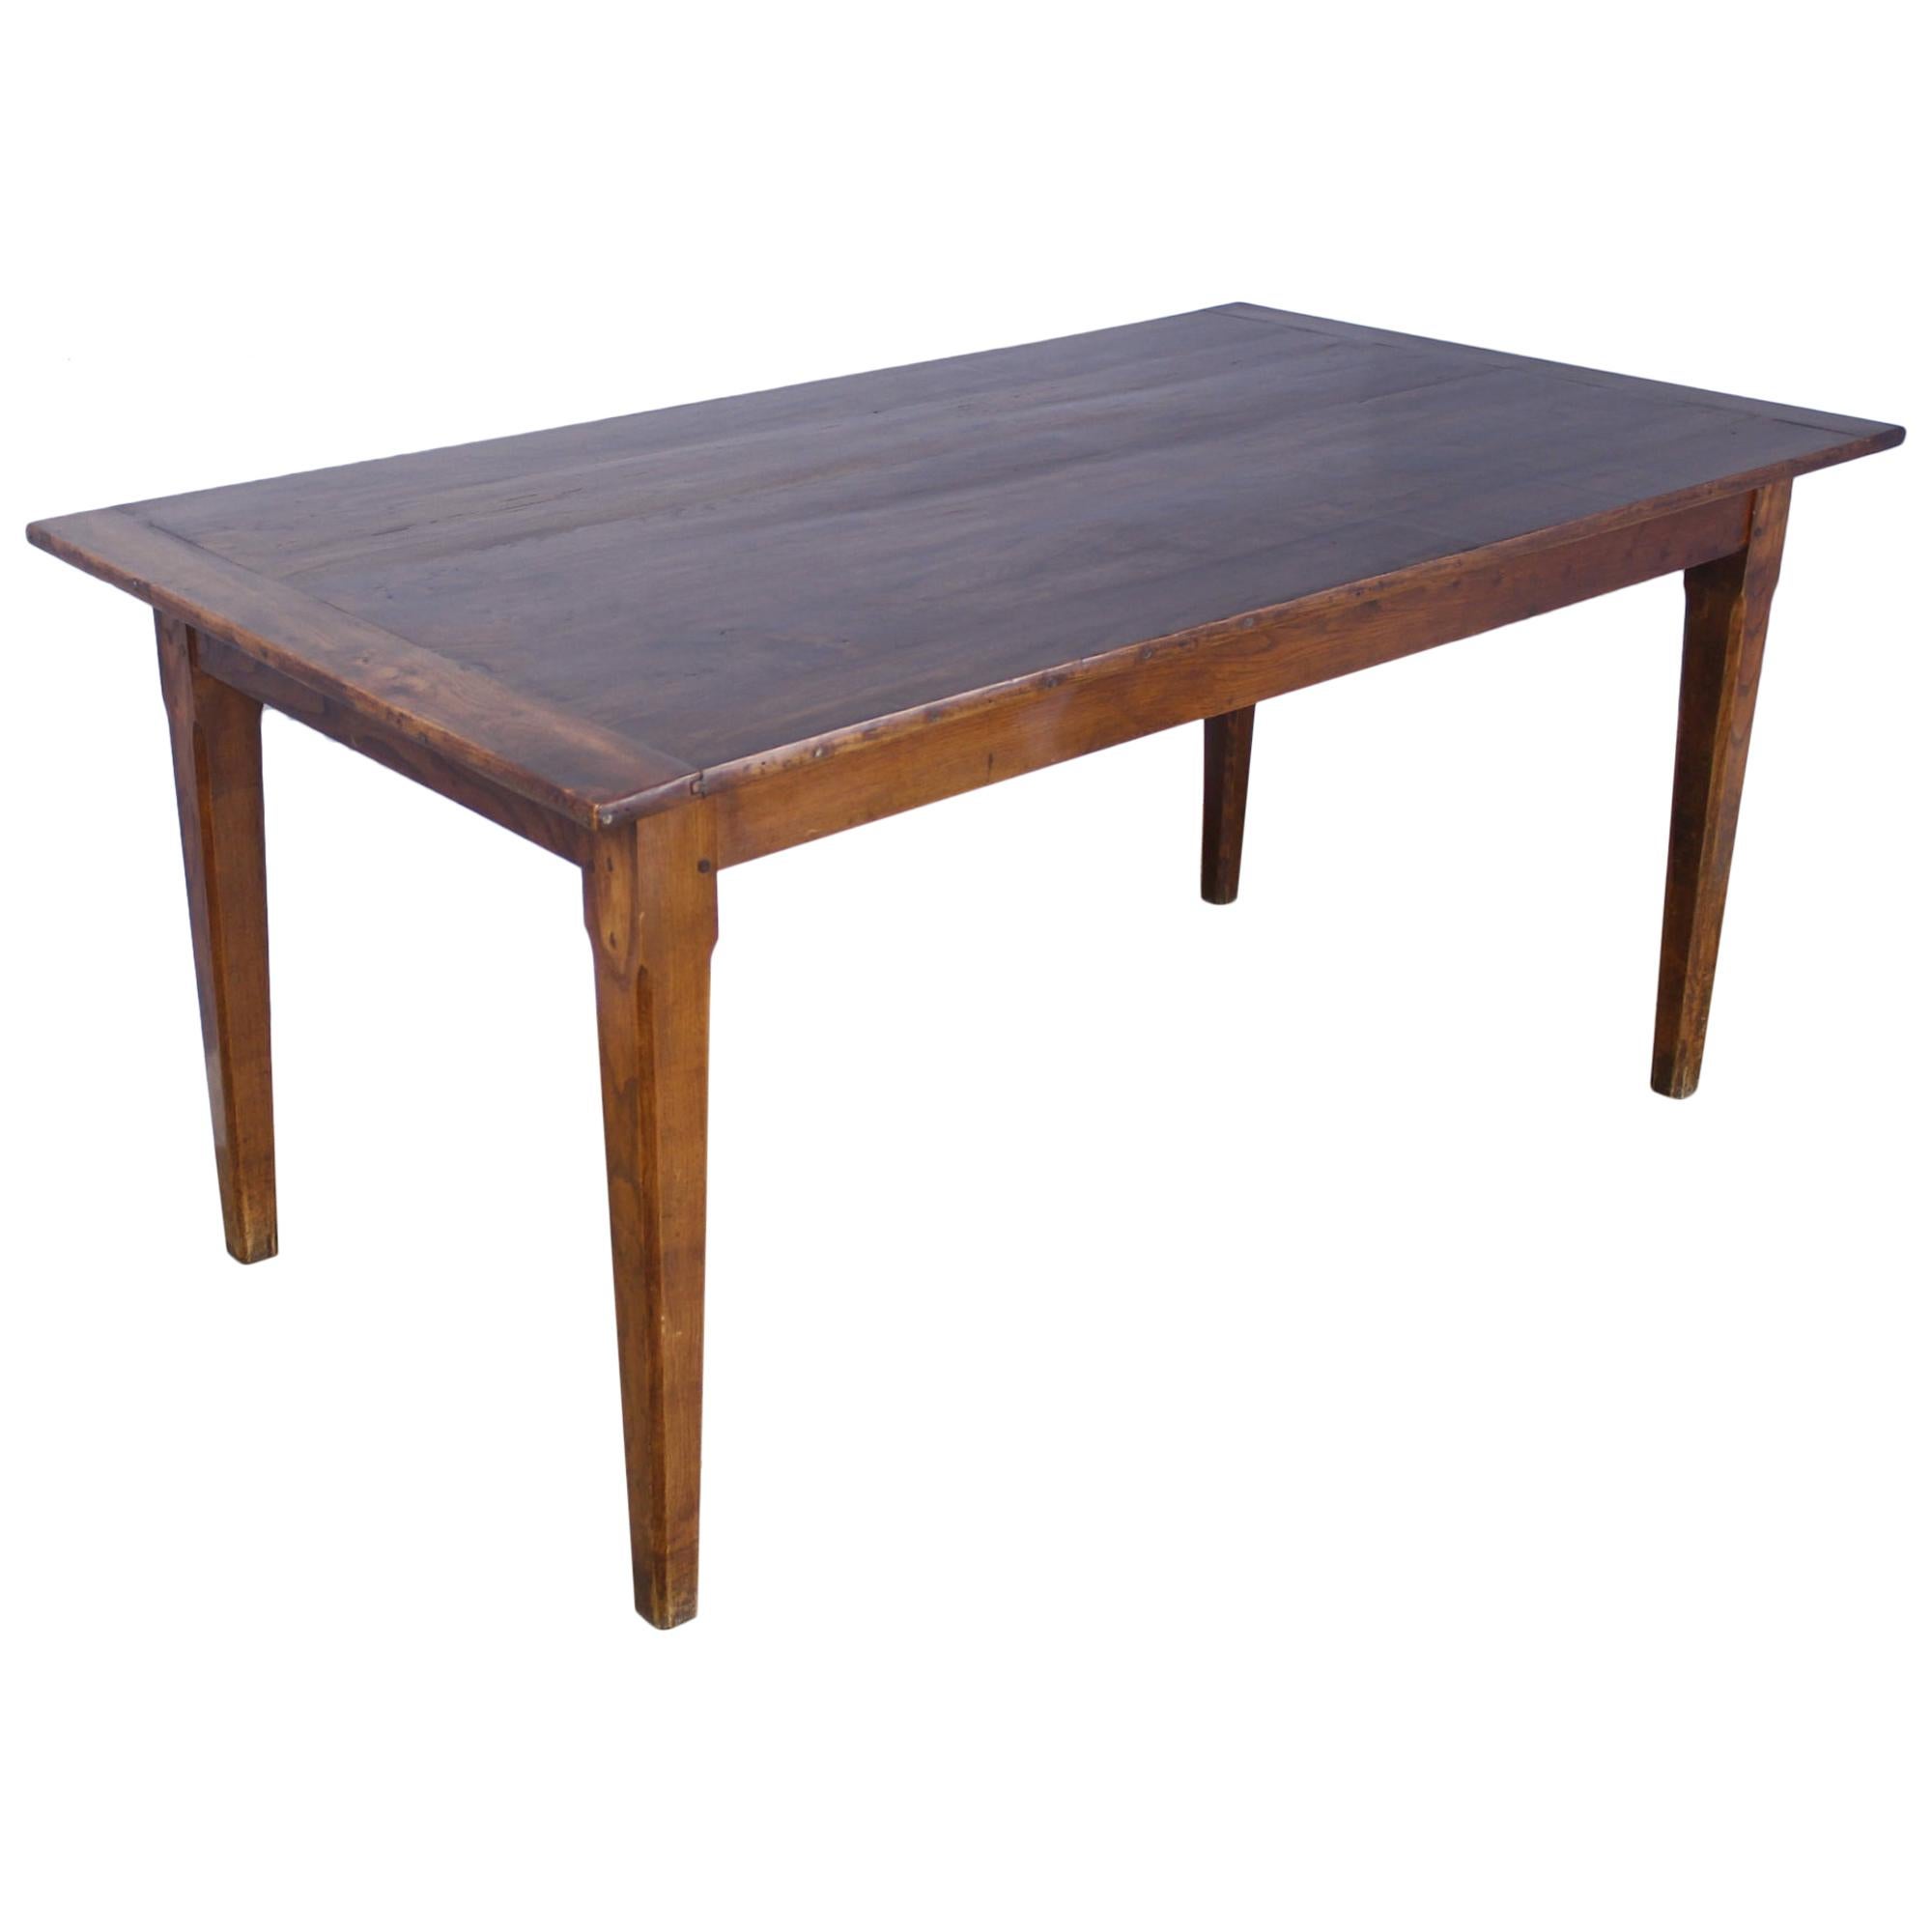 Country Antique Elm Farm Table, Breadboard Ends